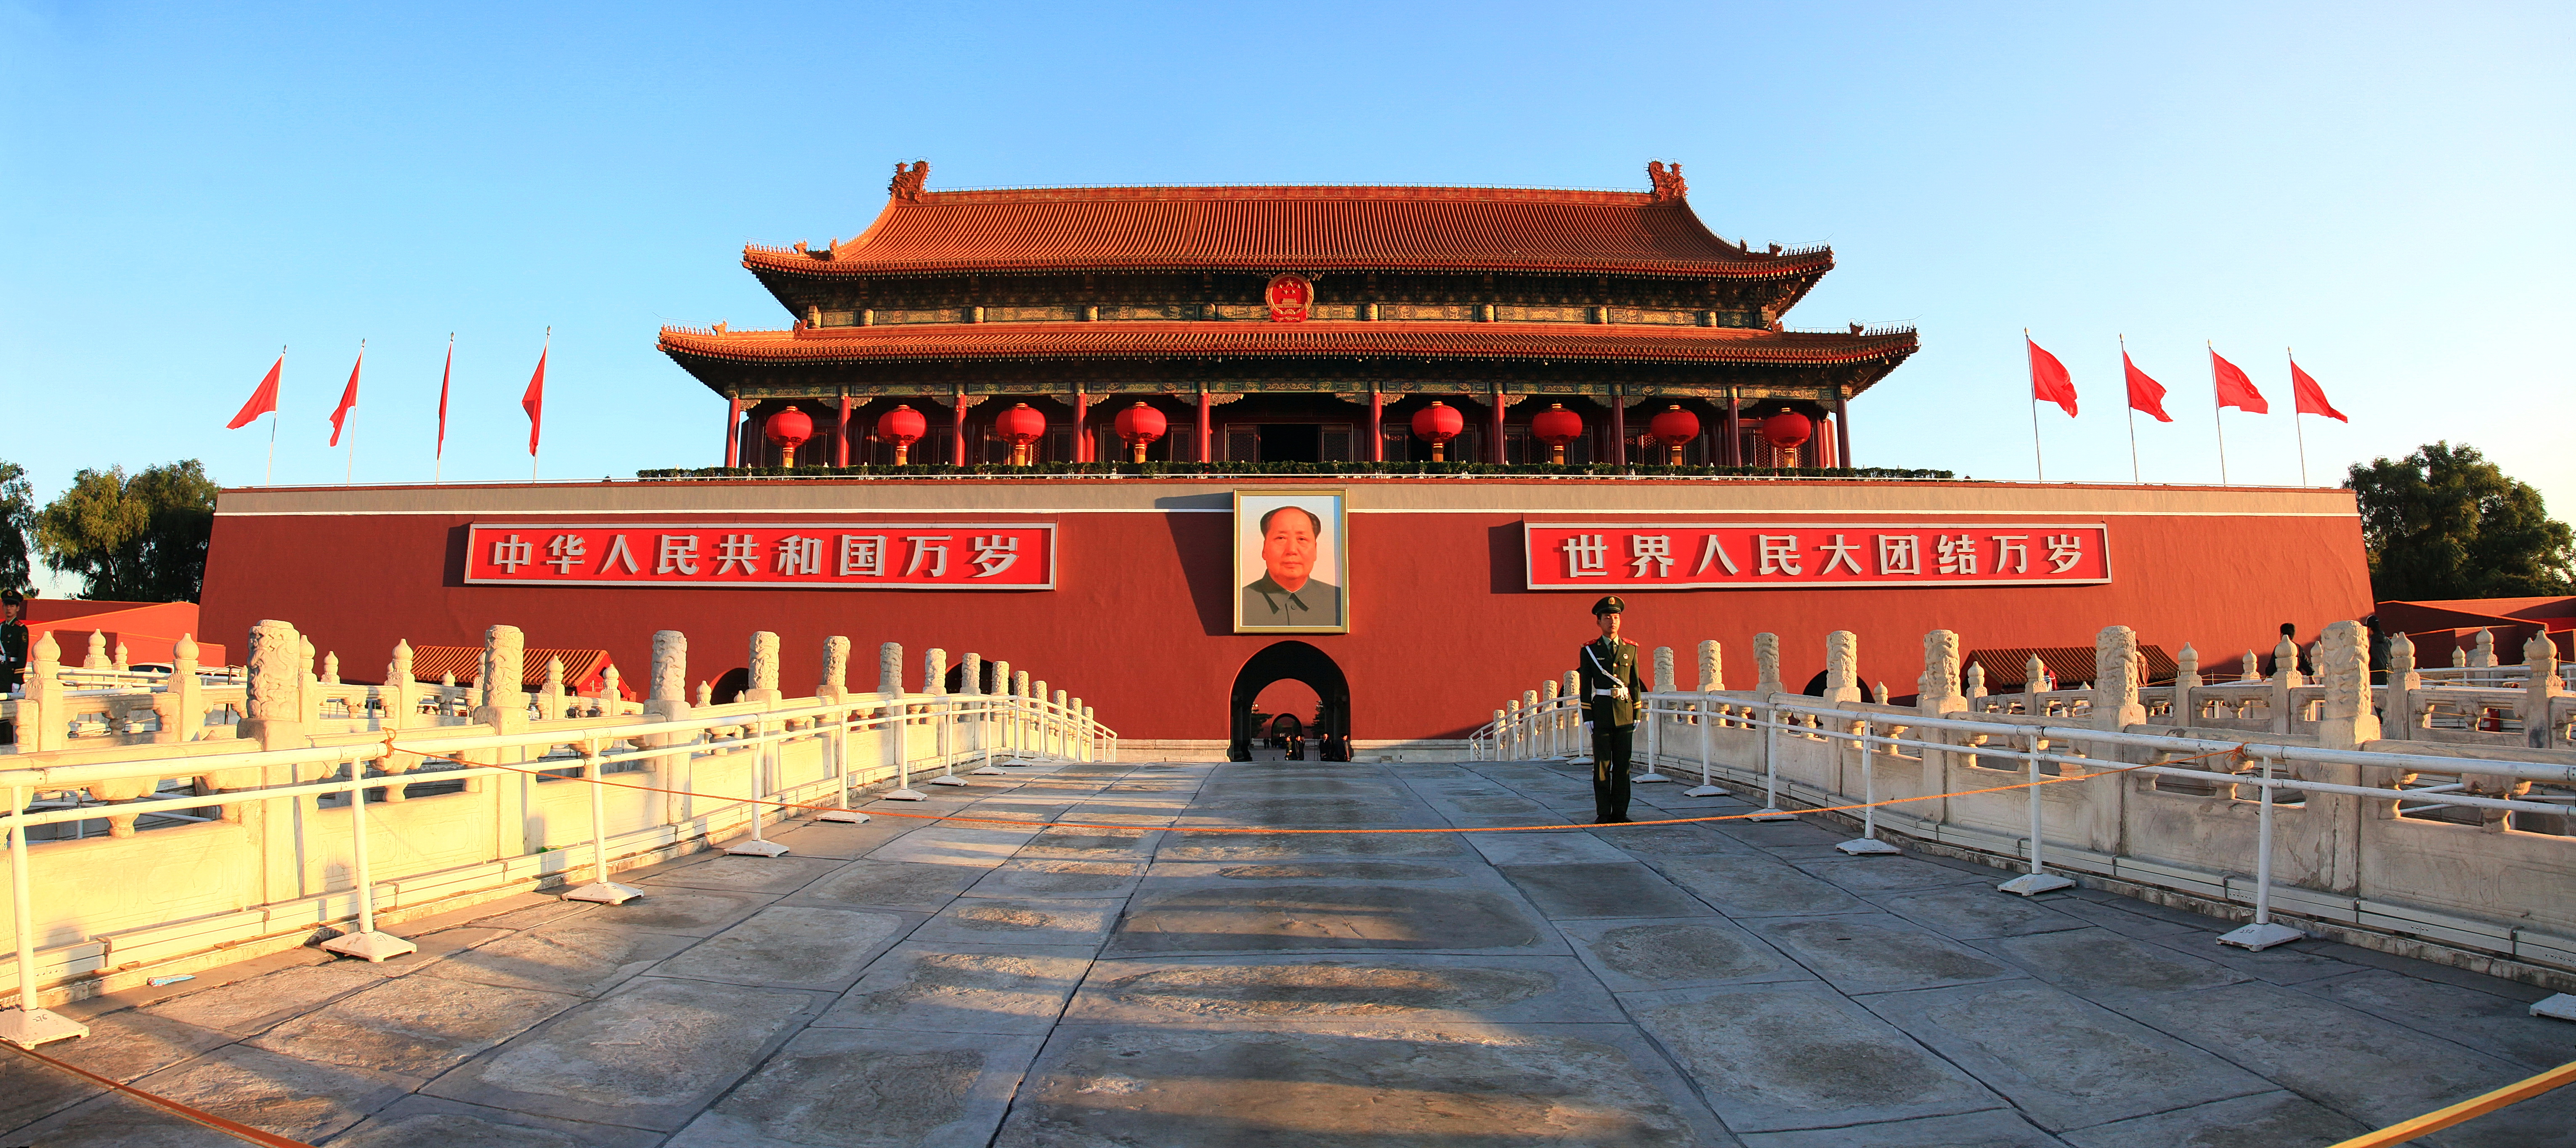 9 Places You Need To Visit In Beijing, China - Hand